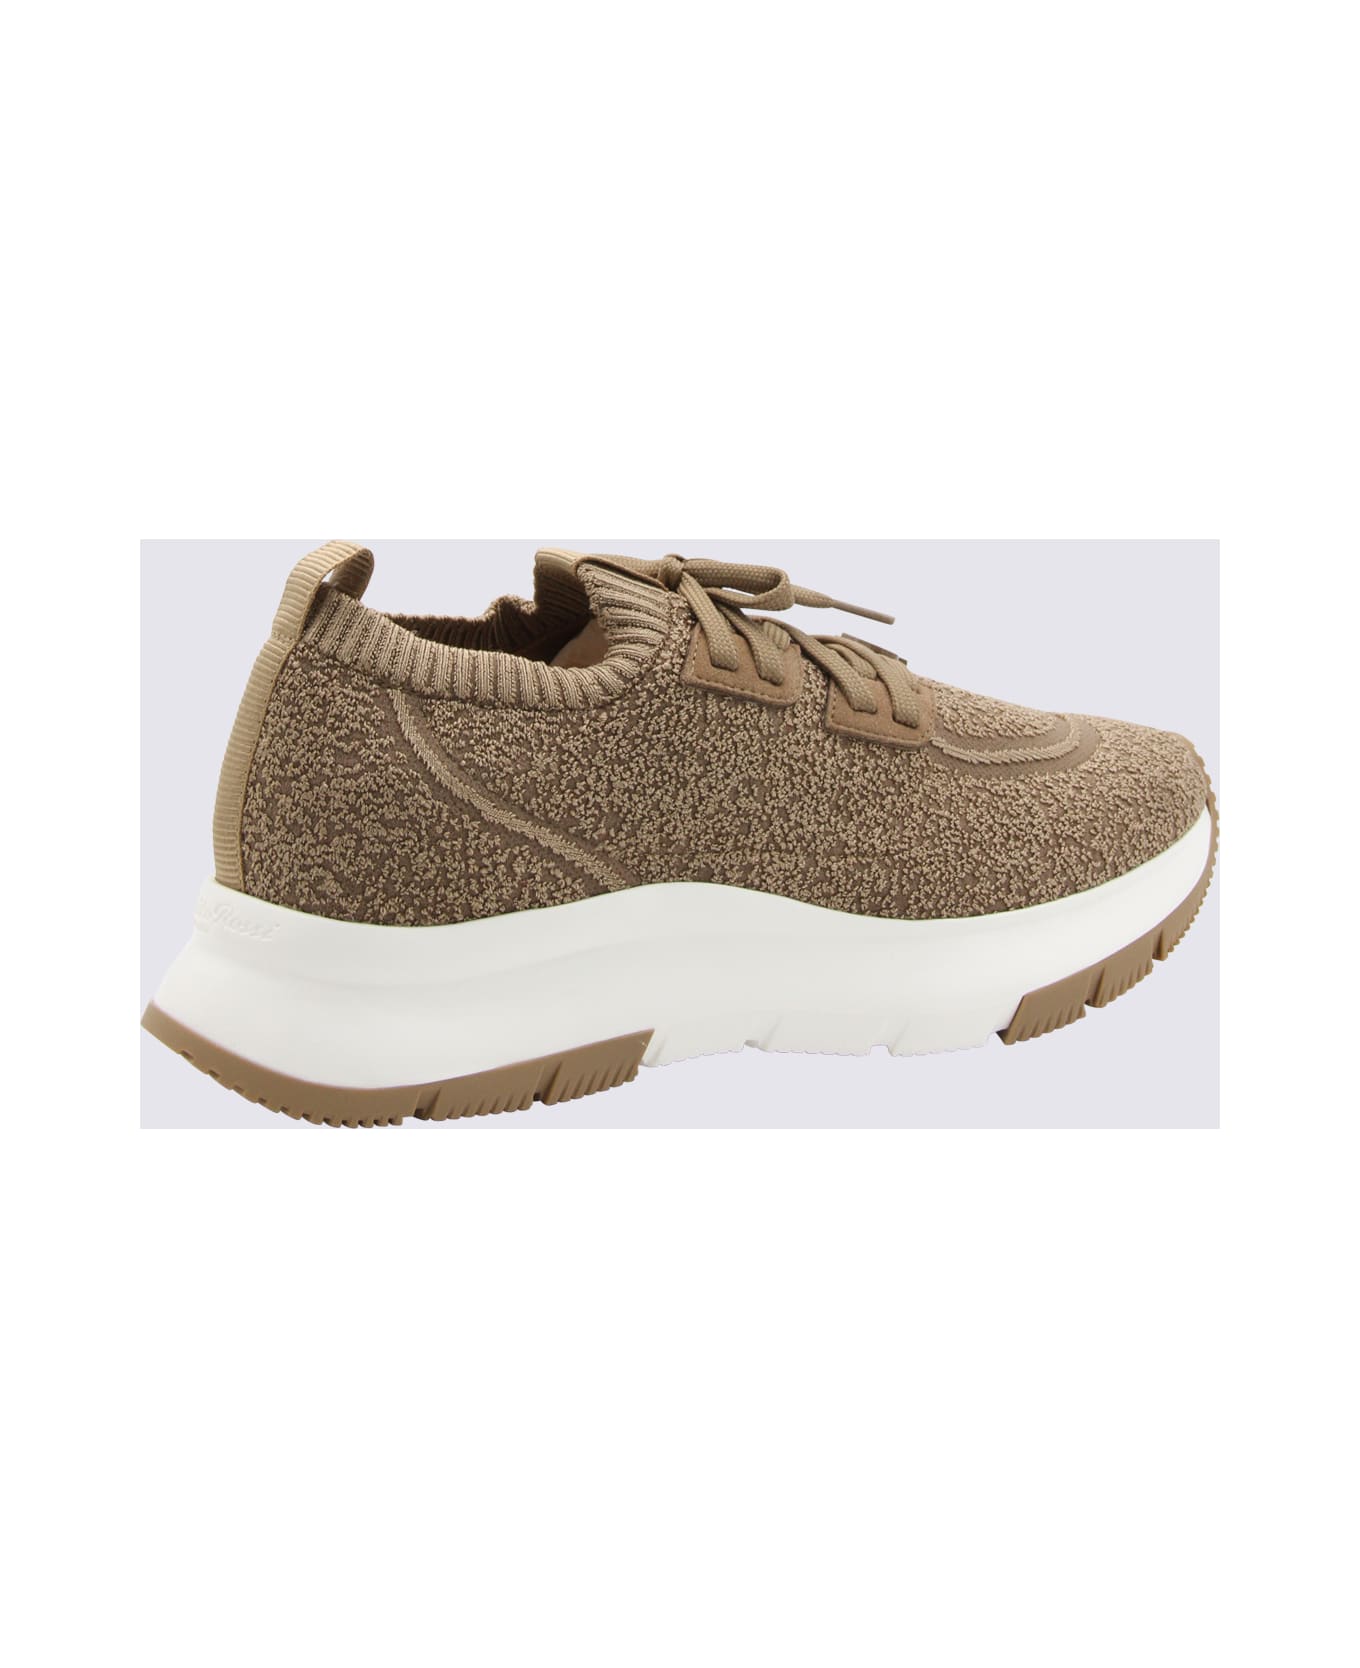 Gianvito Rossi Camel Canvas Sneakers - Brown スニーカー